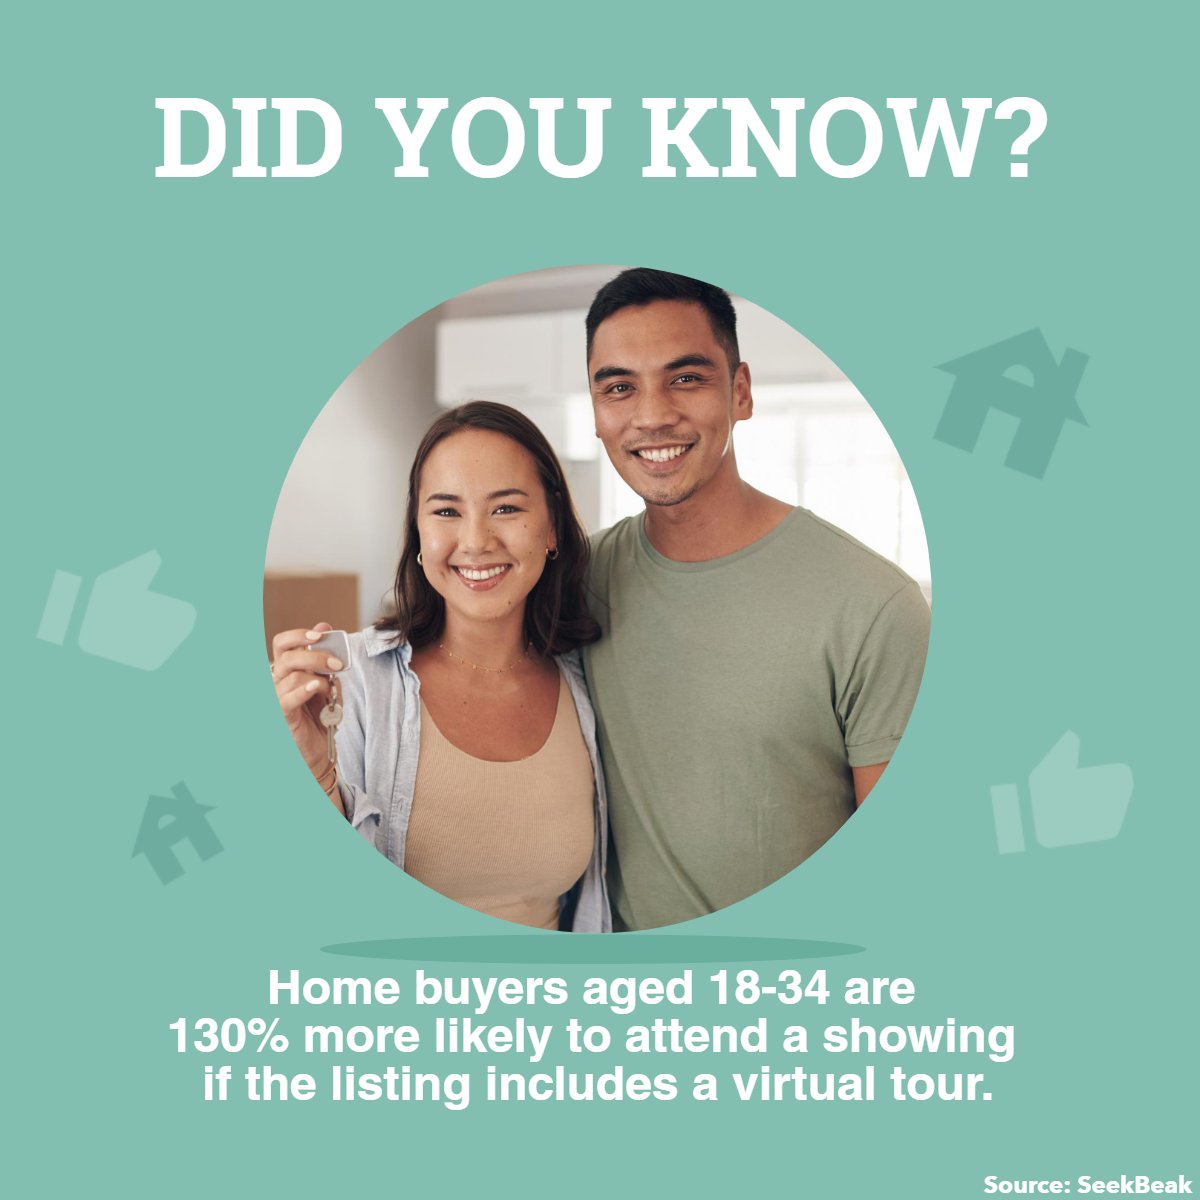 Virtual tours are a great tool, they can provide an immersive experience.

Do you like it when a listing has a Virtual Tour?

Share your opinion below!

#VirtualTour #RealEstateFact
 #cbparadise #ofrarodriguezrealtor #coldwellbanker #coldwellbankerparadise #sellmyhome